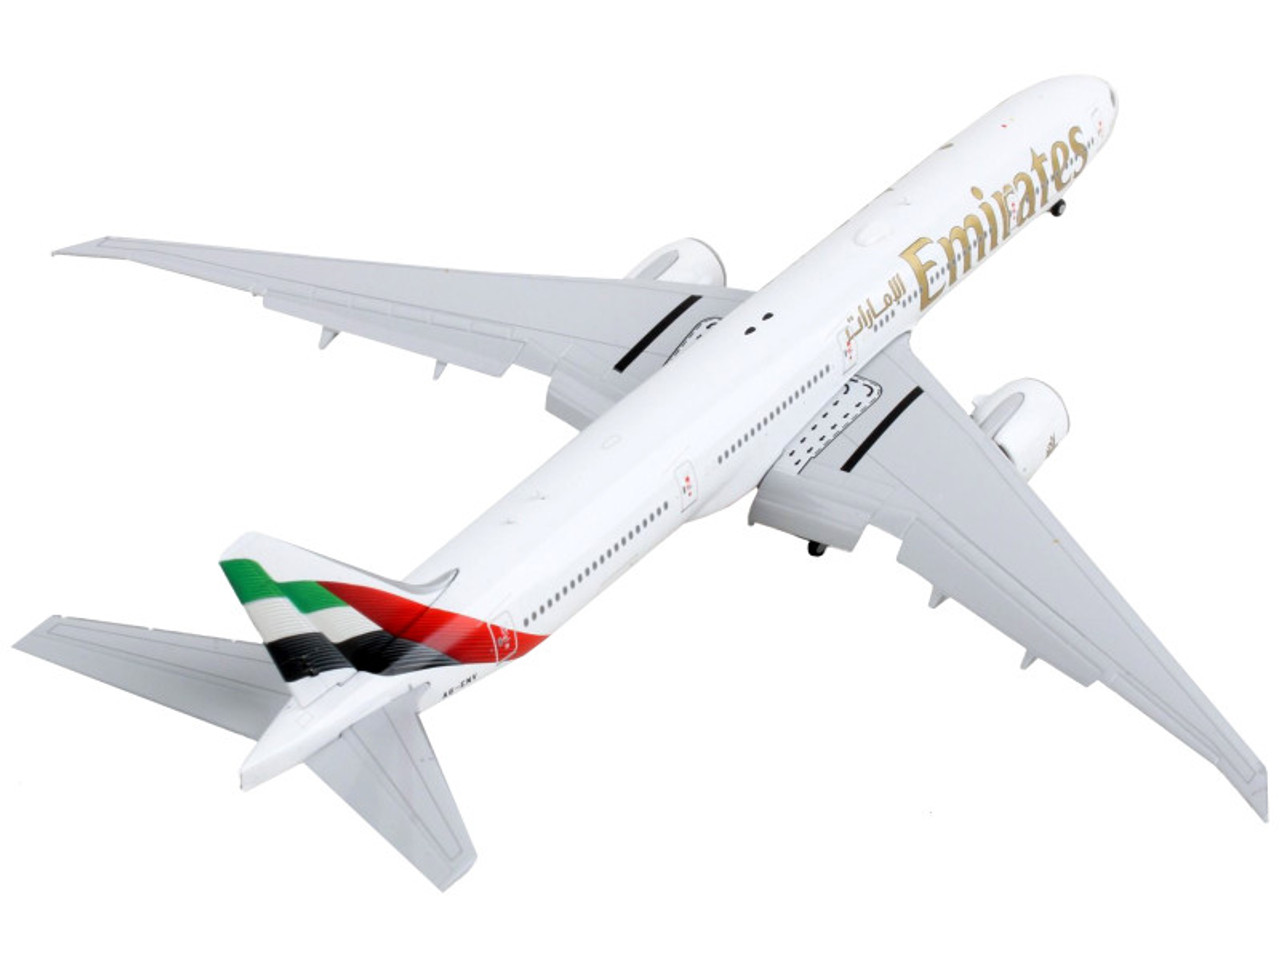 Boeing 777-300ER Commercial Aircraft with Flaps Down "Emirates Airlines" White with Tail Stripes 1/400 Diecast Model Airplane by GeminiJets